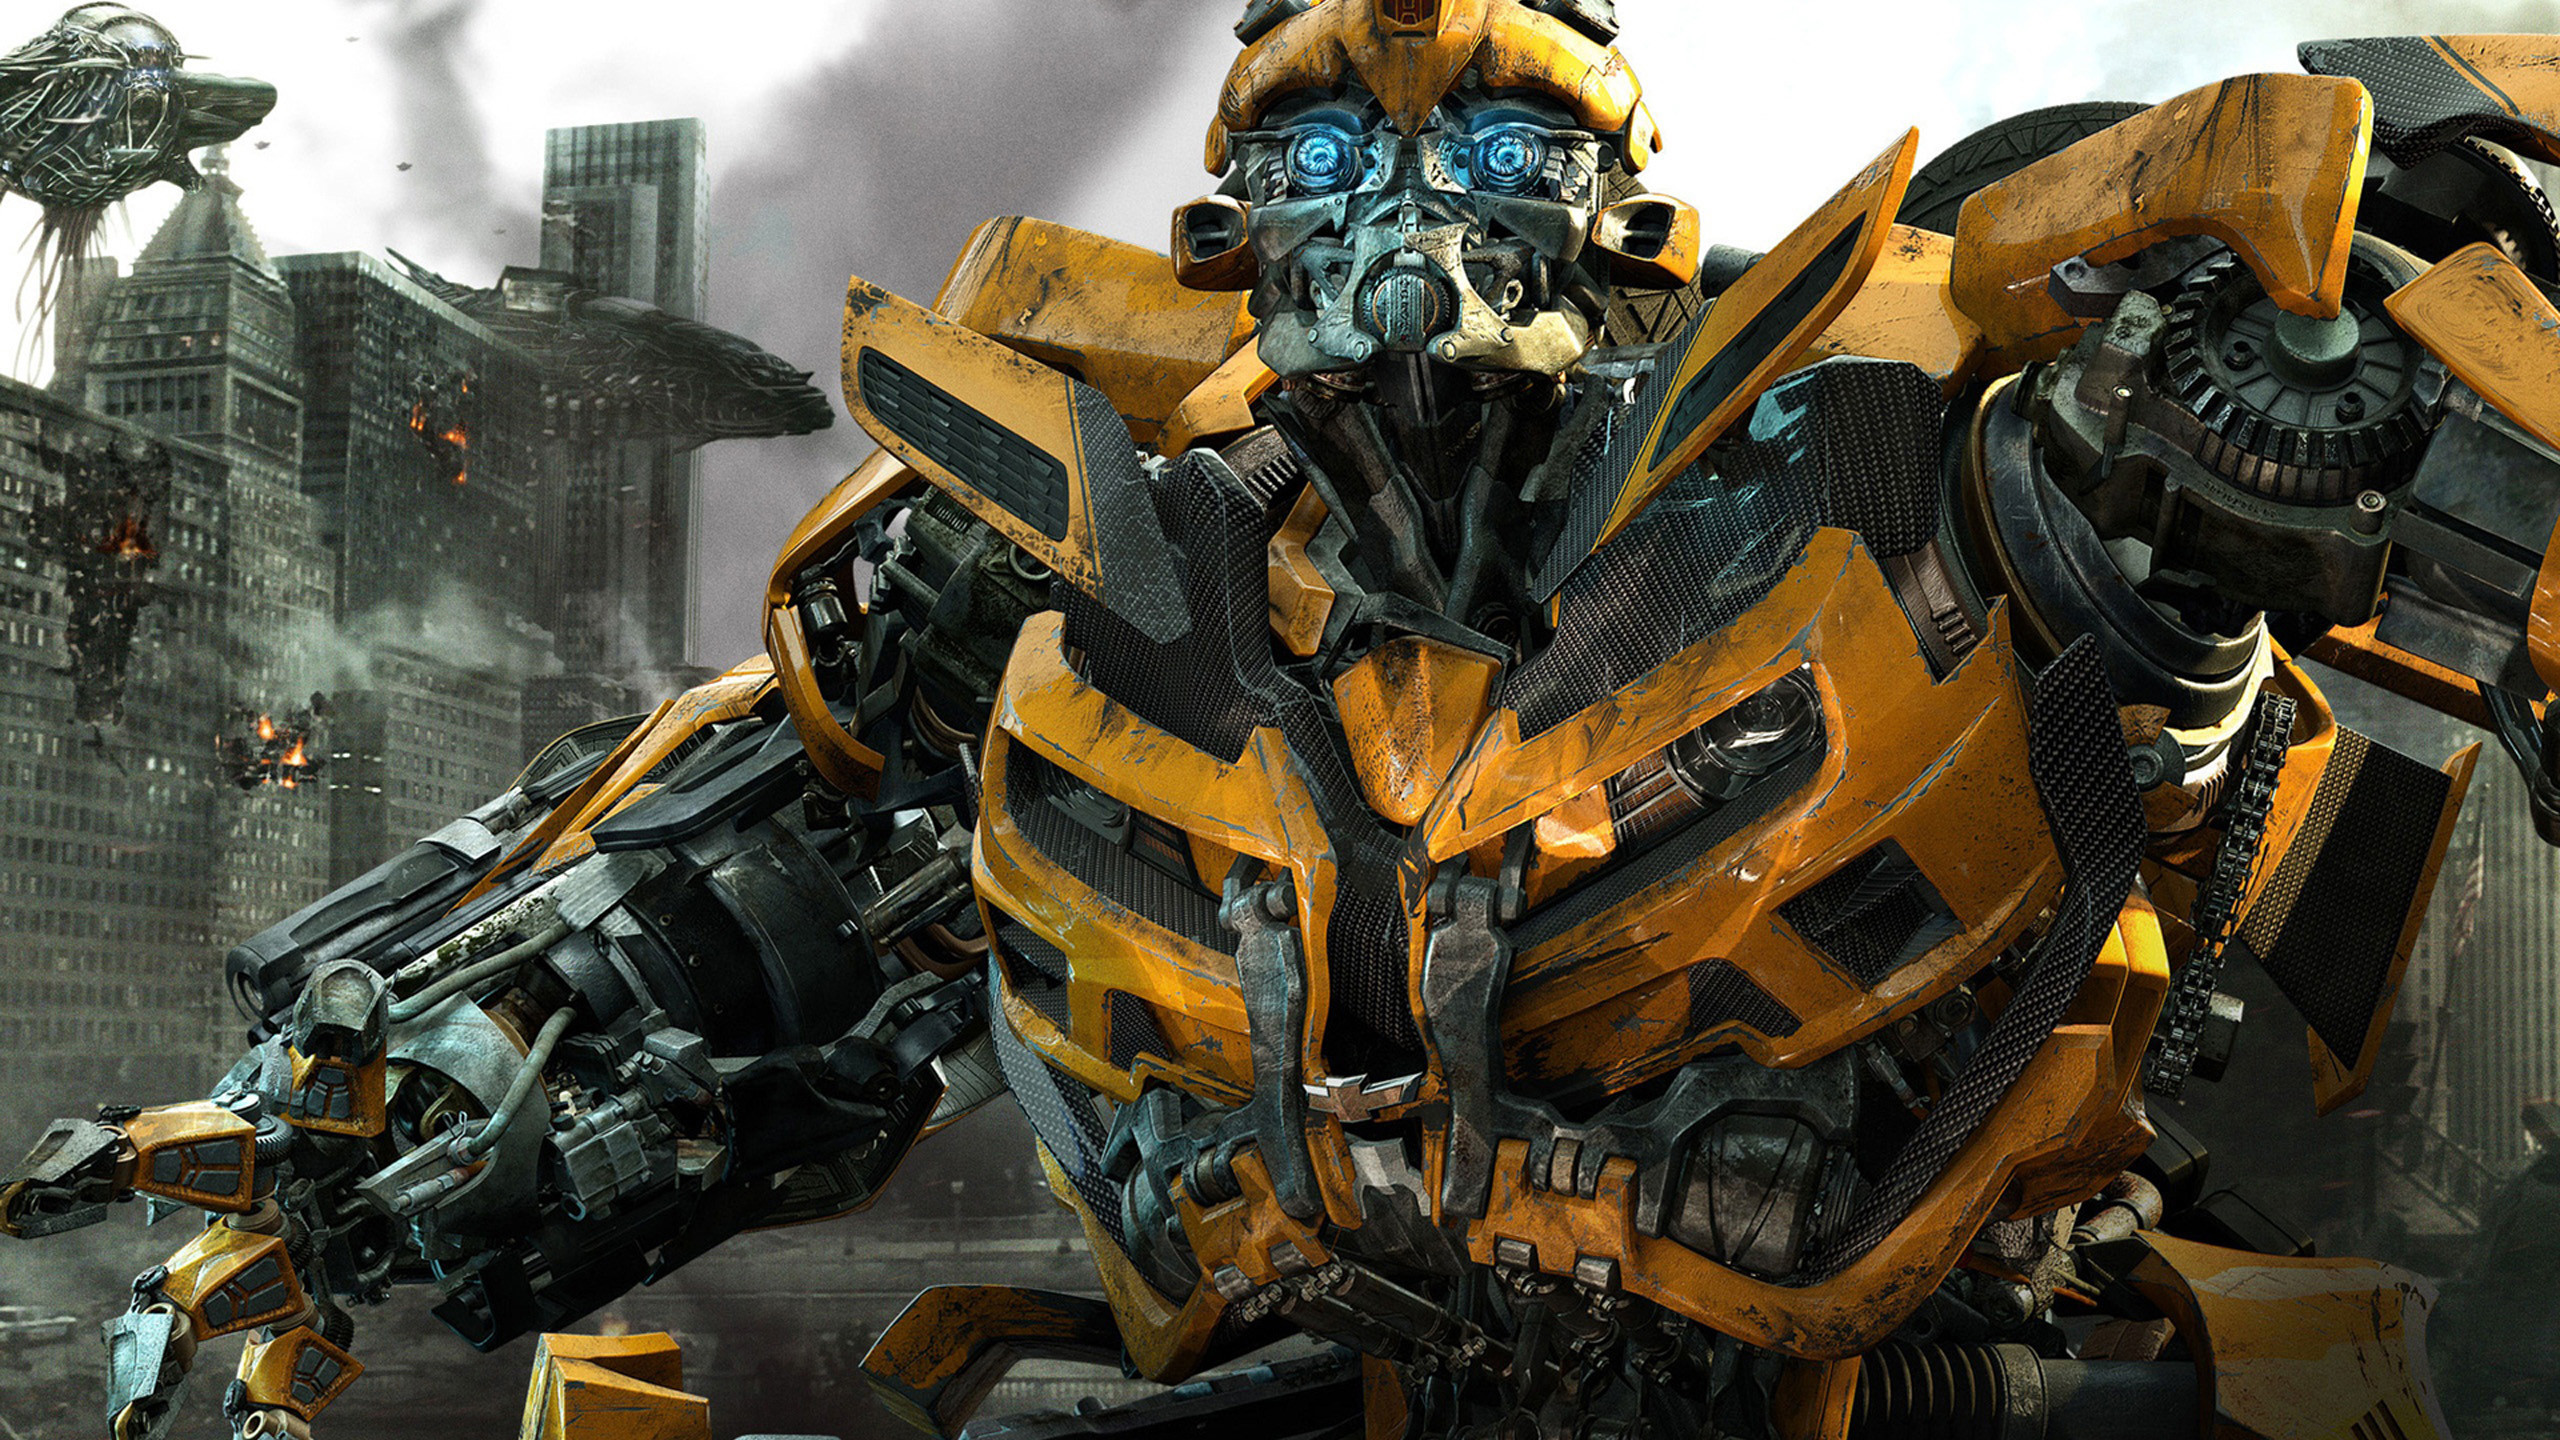 2560x1440 Transformers Wallpapers High Resolution